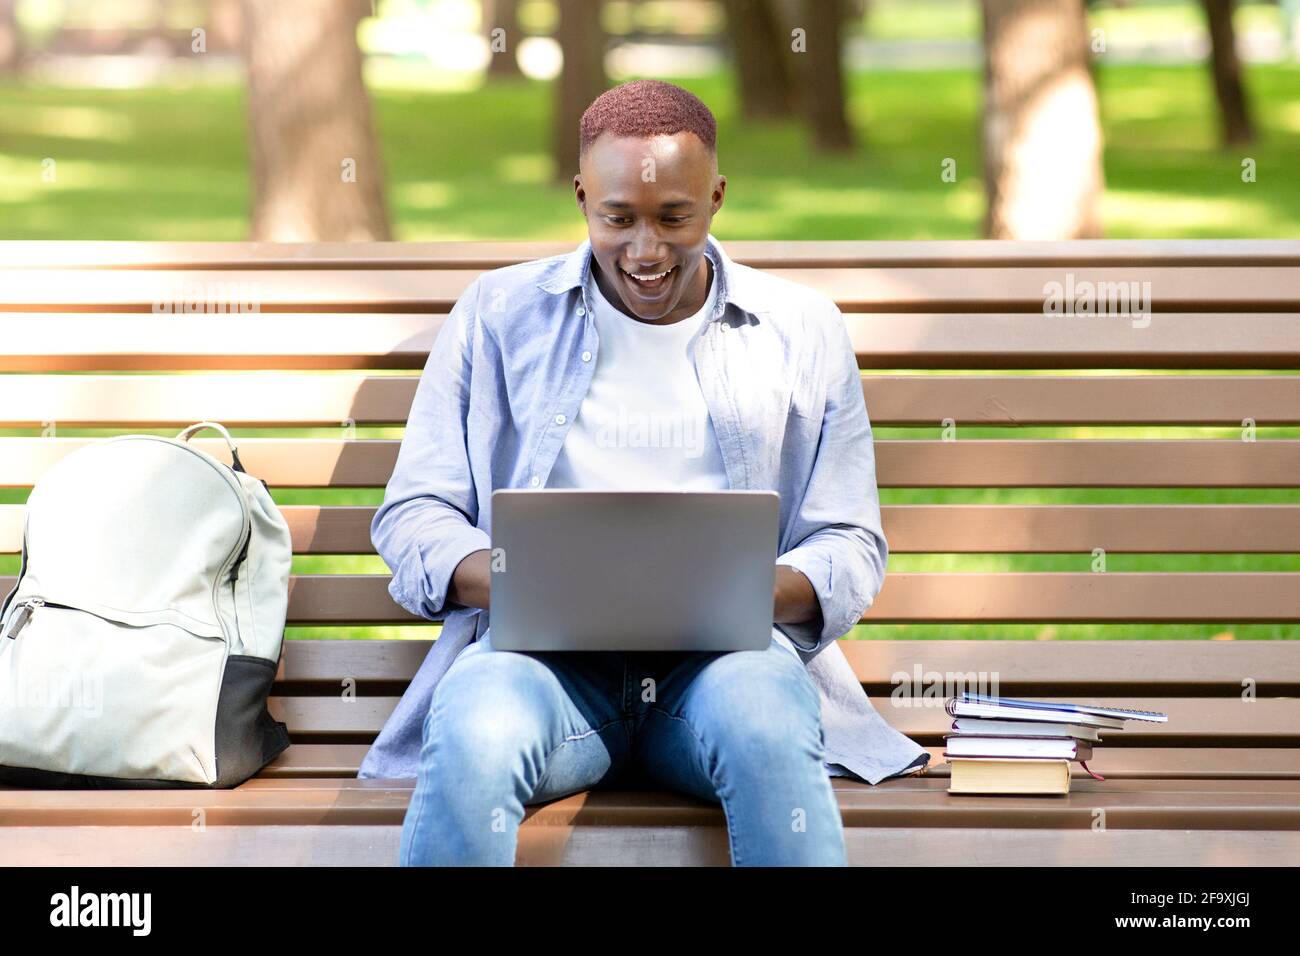 Excited black student looking at laptop screen, cannot believe his success at park Stock Photo